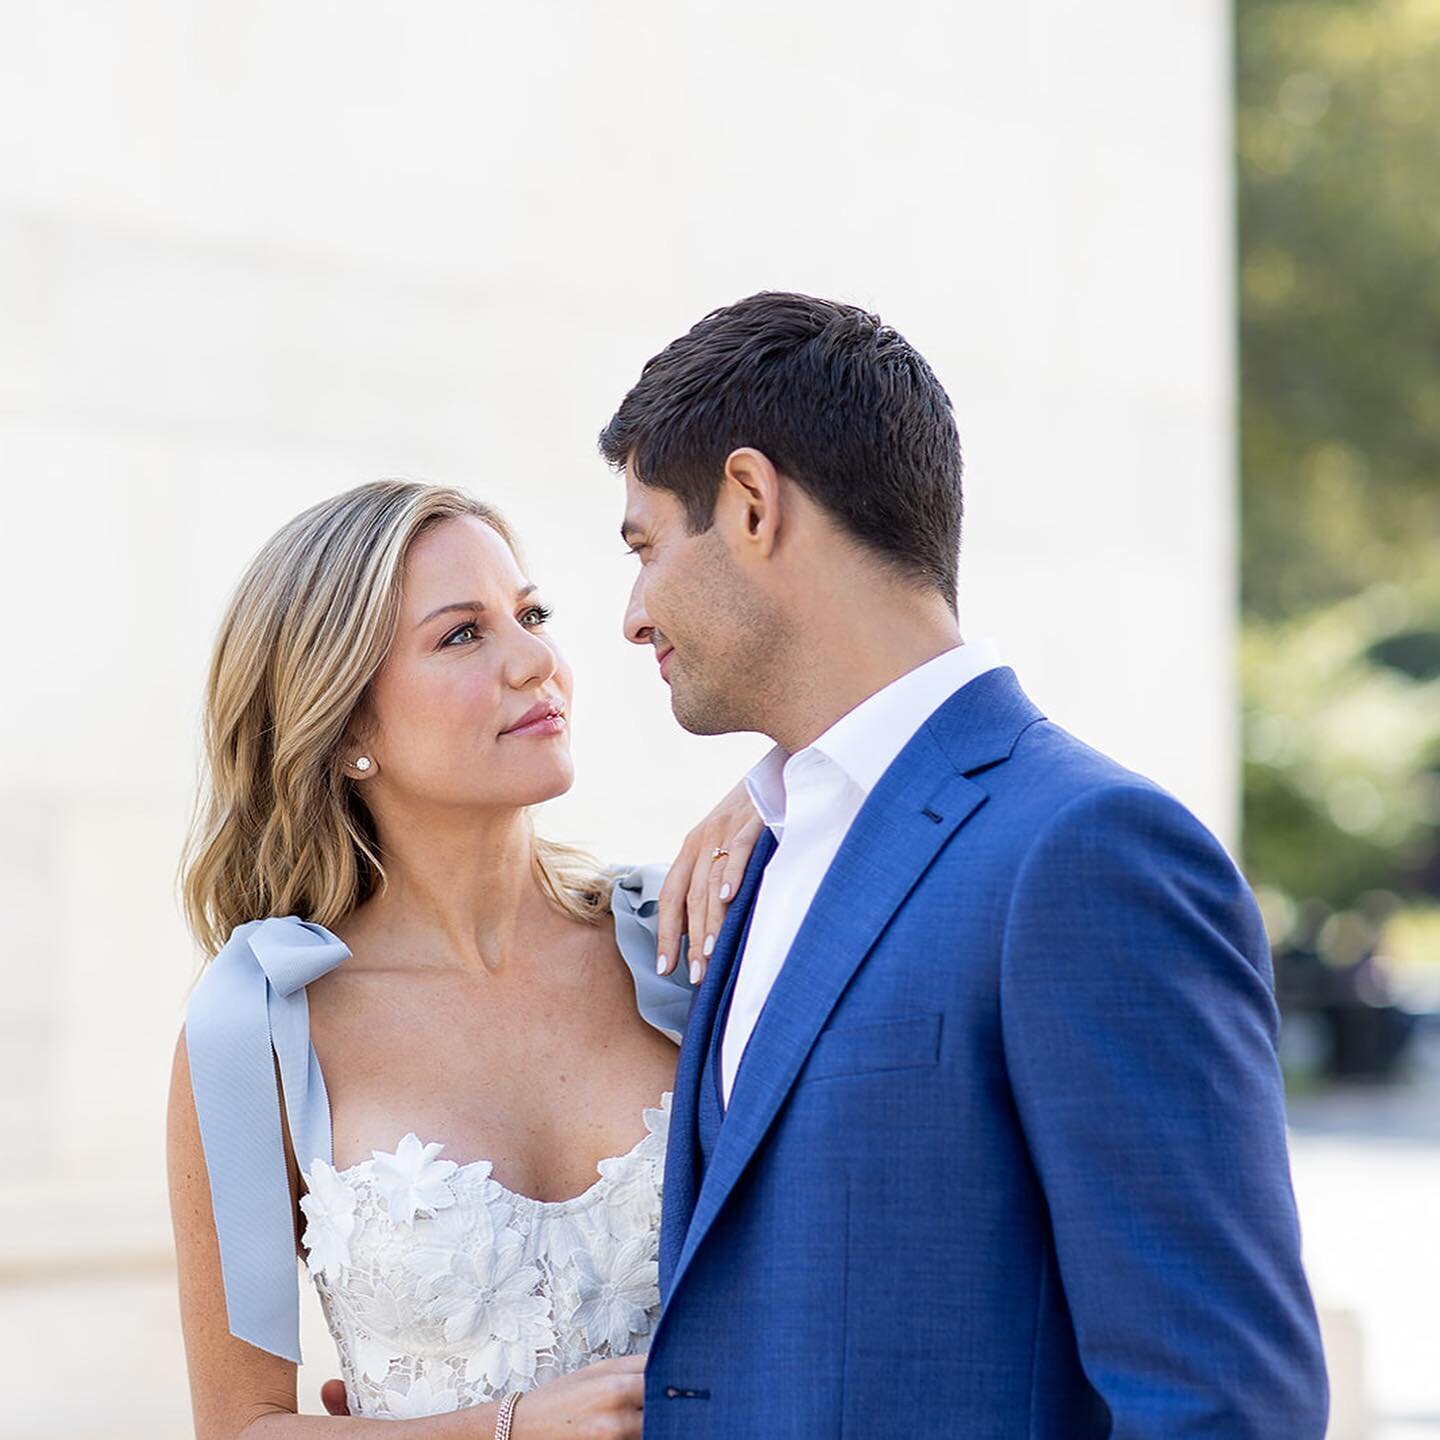 Chelsea and Andrew infused late summer NYC with such charm! Every detail cultivating their love story 🥂

Host: @makeprettyworkshop @mollymccauley_photo
Styling: @agency8bridalstylist @lizzypolden
Video: @loyerfilms
Photo Assist: @clairenicolephotogr